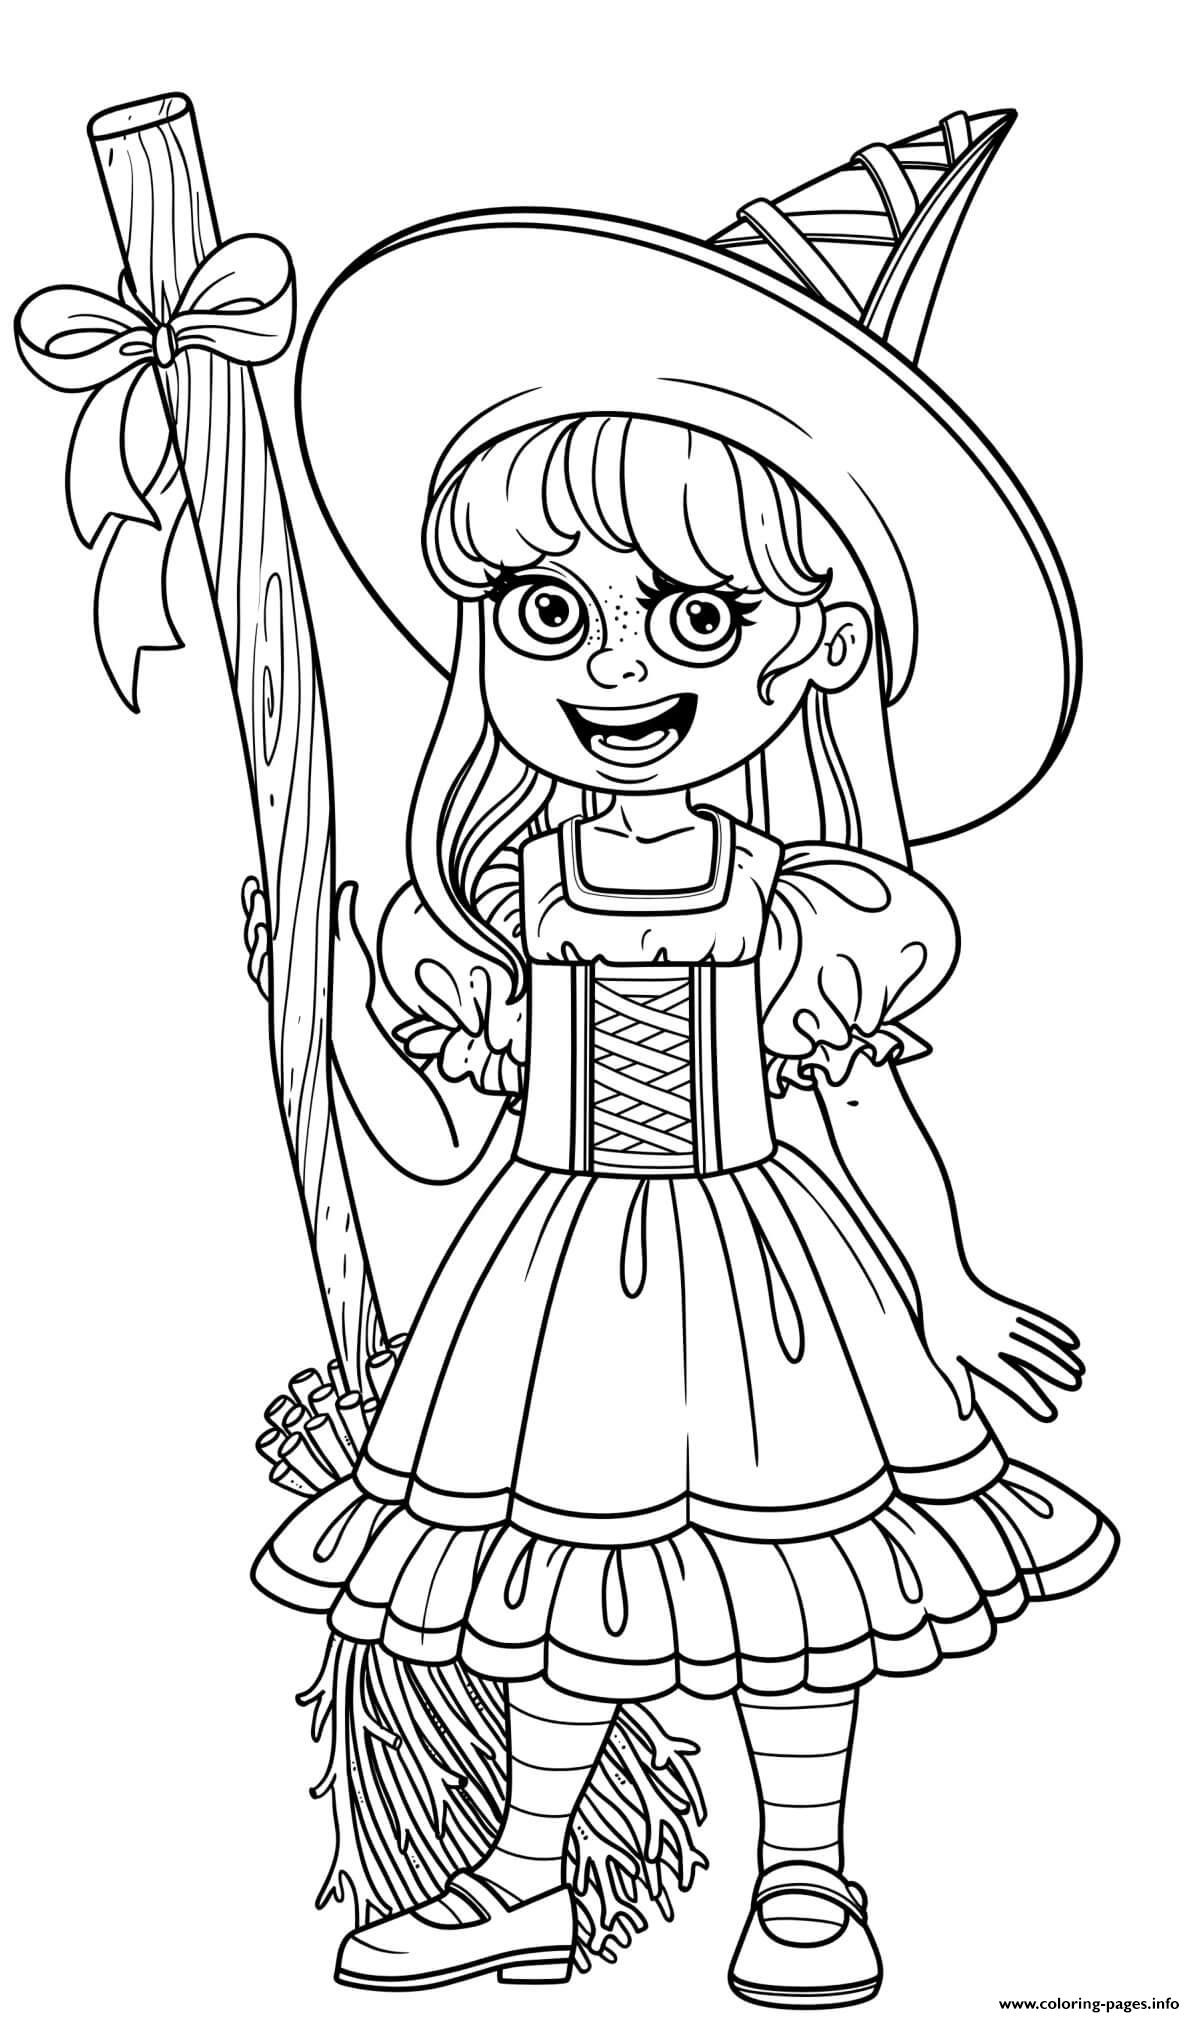 halloween-girl-witches-costume-broomstick-coloring-page-printable